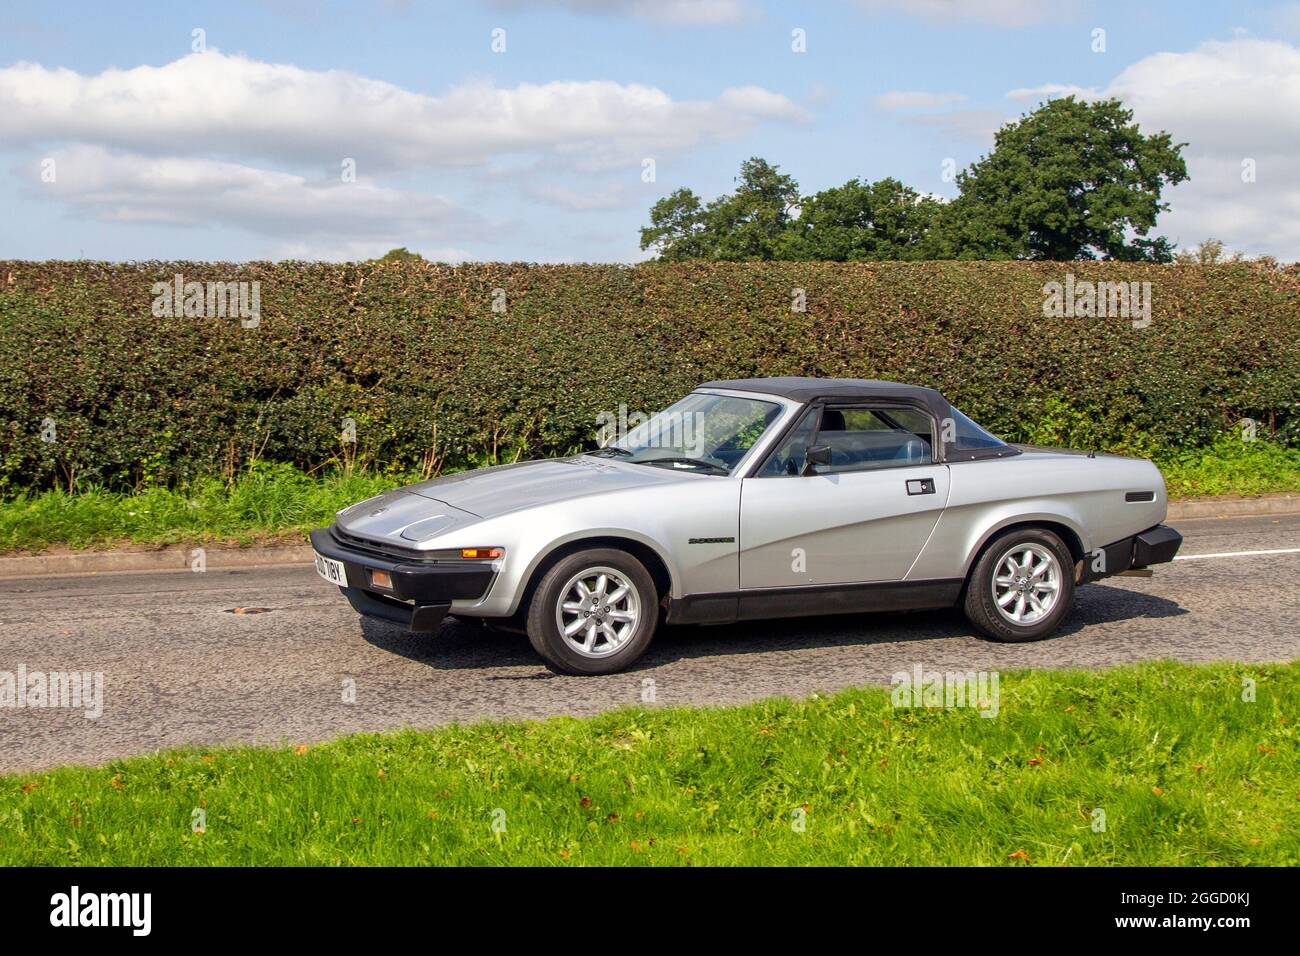 1982 80s silver Triumph TR7 1998cc petrol two seater, 2dr British sports car en-route to Capesthorne Hall classic August car show, Cheshire, UK Stock Photo